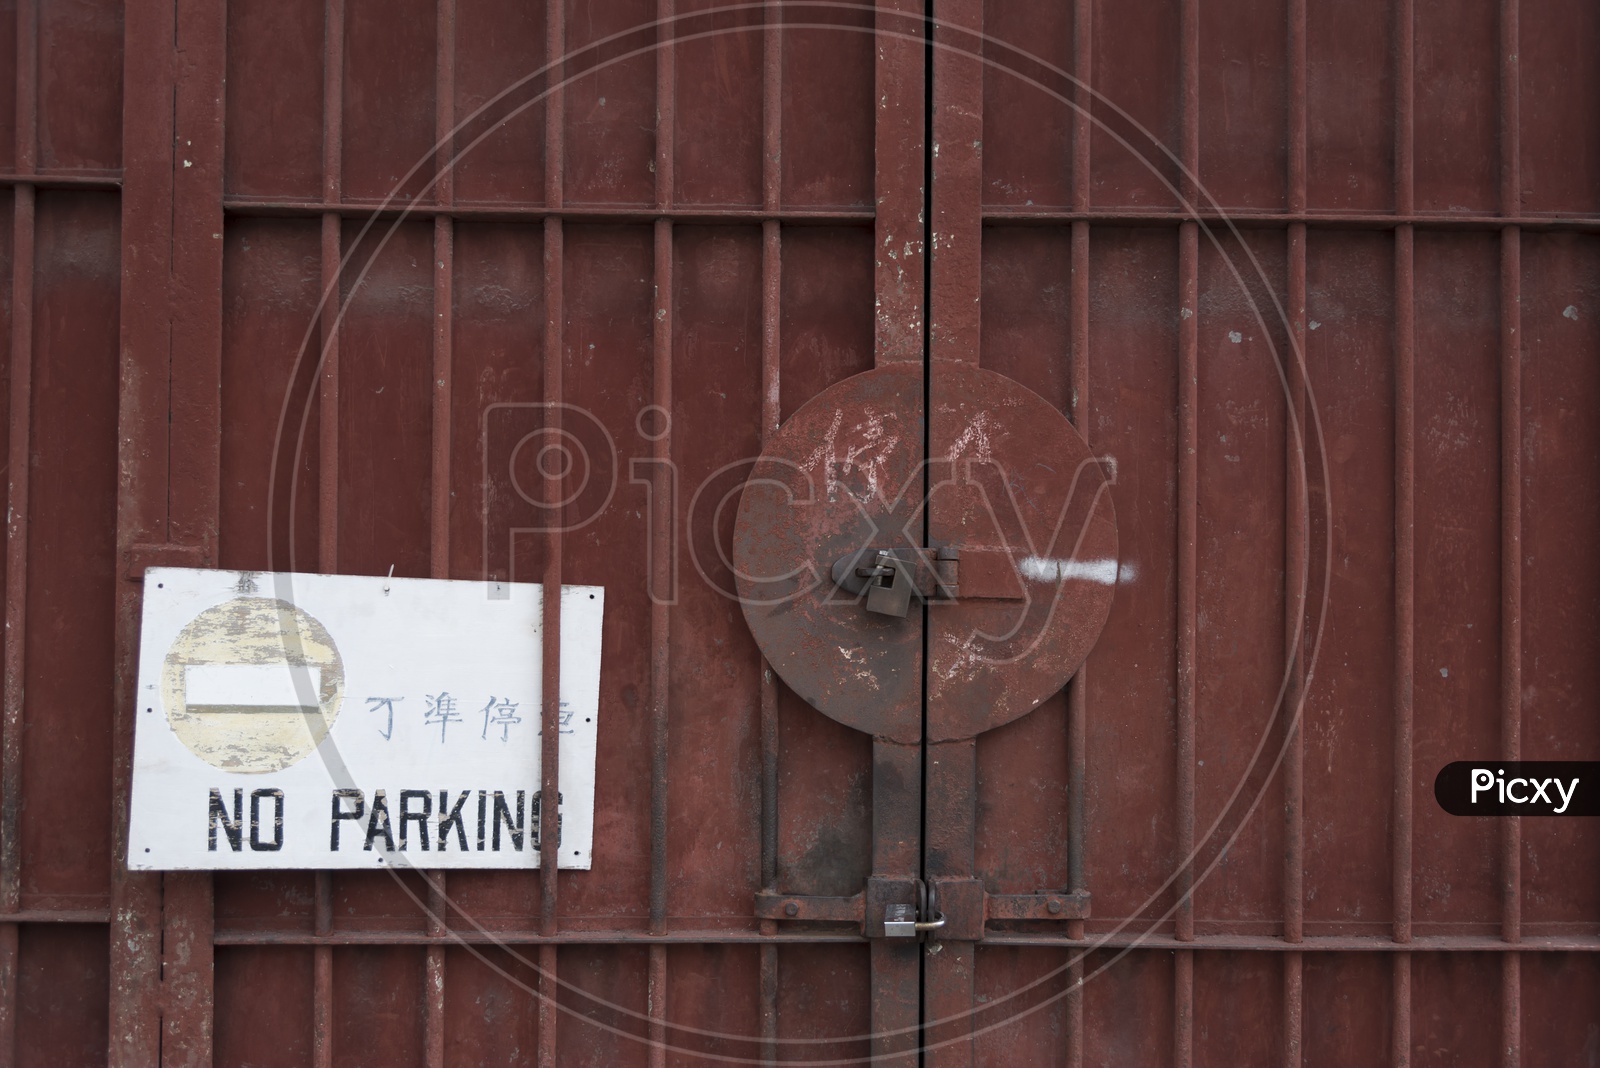 No Parking signage on the iron door